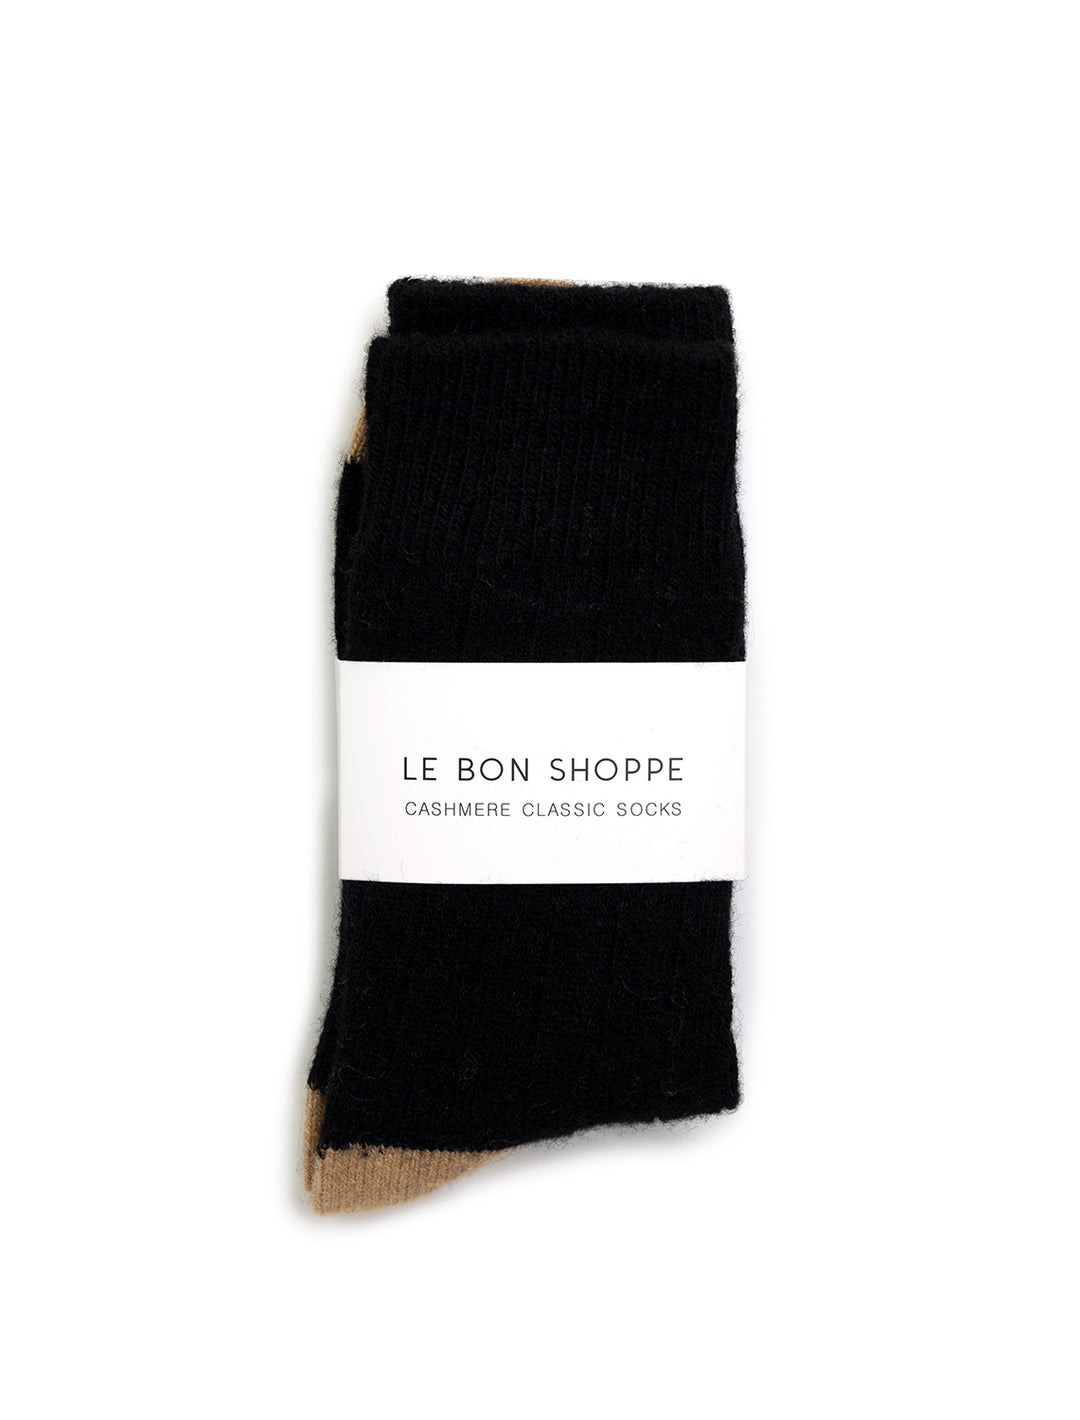 classic cashmere socks in black and camel